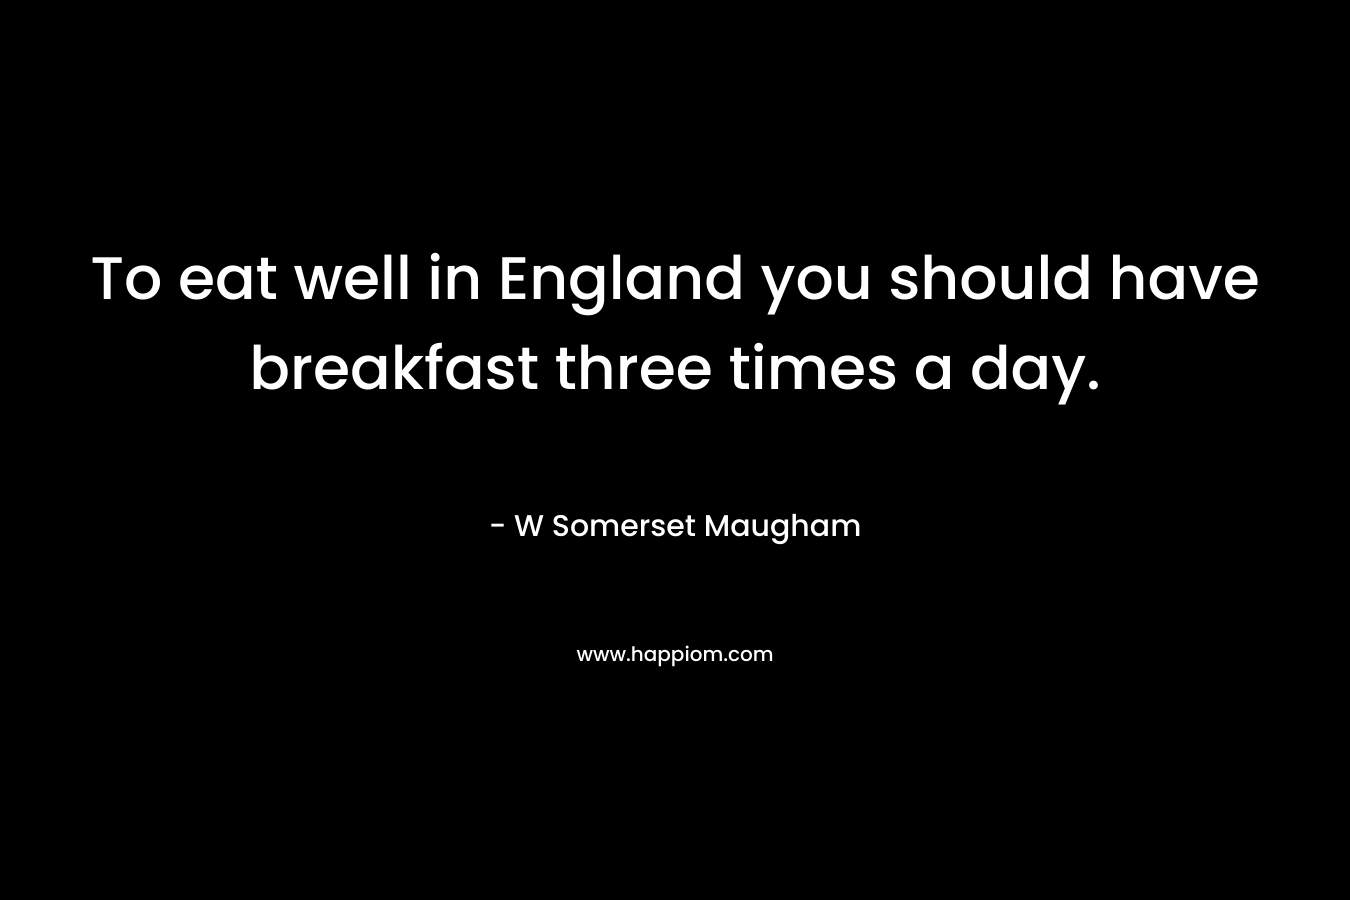 To eat well in England you should have breakfast three times a day. – W Somerset Maugham